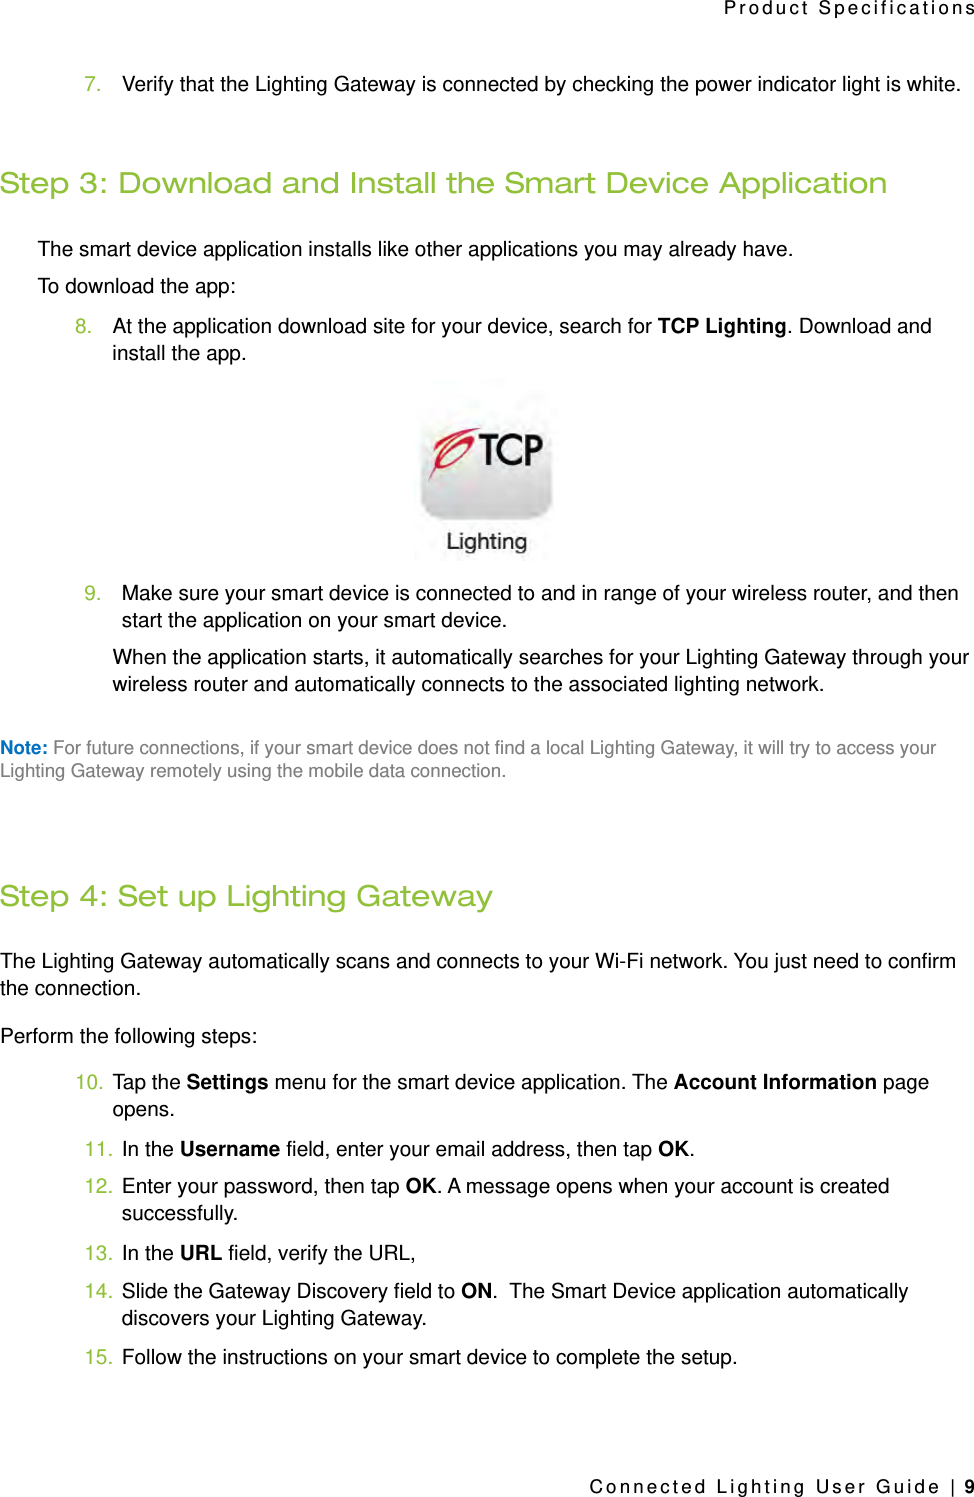 7. Verify that the Lighting Gateway is connected by checking the power indicator light is white.Step 3: Download and Install the Smart Device ApplicationThe smart device application installs like other applications you may already have. To download the app:8. At the application download site for your device, search for TCP Lighting. Download and install the app.9. Make sure your smart device is connected to and in range of your wireless router, and then start the application on your smart device. When the application starts, it automatically searches for your Lighting Gateway through your wireless router and automatically connects to the associated lighting network.Note: For future connections, if your smart device does not find a local Lighting Gateway, it will try to access your Lighting Gateway remotely using the mobile data connection.Step 4: Set up Lighting GatewayThe Lighting Gateway automatically scans and connects to your Wi-Fi network. You just need to confirm the connection.Perform the following steps:10. Tap the Settings menu for the smart device application. The Account Information page opens. 11. In the Username field, enter your email address, then tap OK.12. Enter your password, then tap OK. A message opens when your account is created successfully.13. In the URL field, verify the URL, 14. Slide the Gateway Discovery field to ON.  The Smart Device application automatically discovers your Lighting Gateway. 15. Follow the instructions on your smart device to complete the setup.Product SpecificationsConnected Lighting User Guide | 9